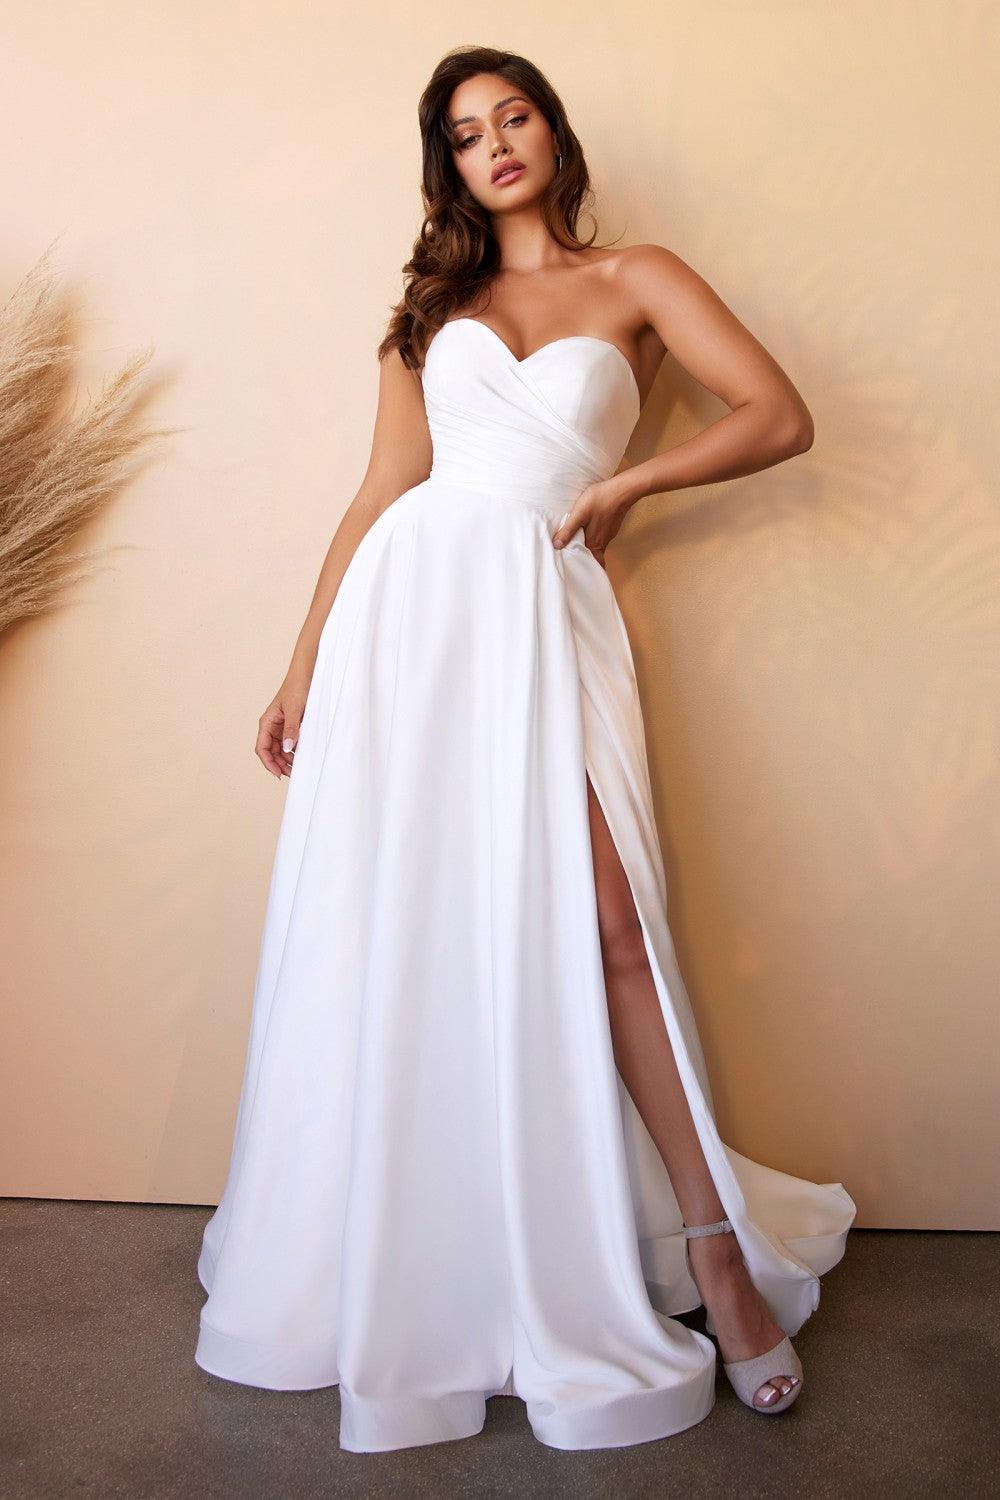 Satin Strapless Long Bridal Gown - The Dress Outlet